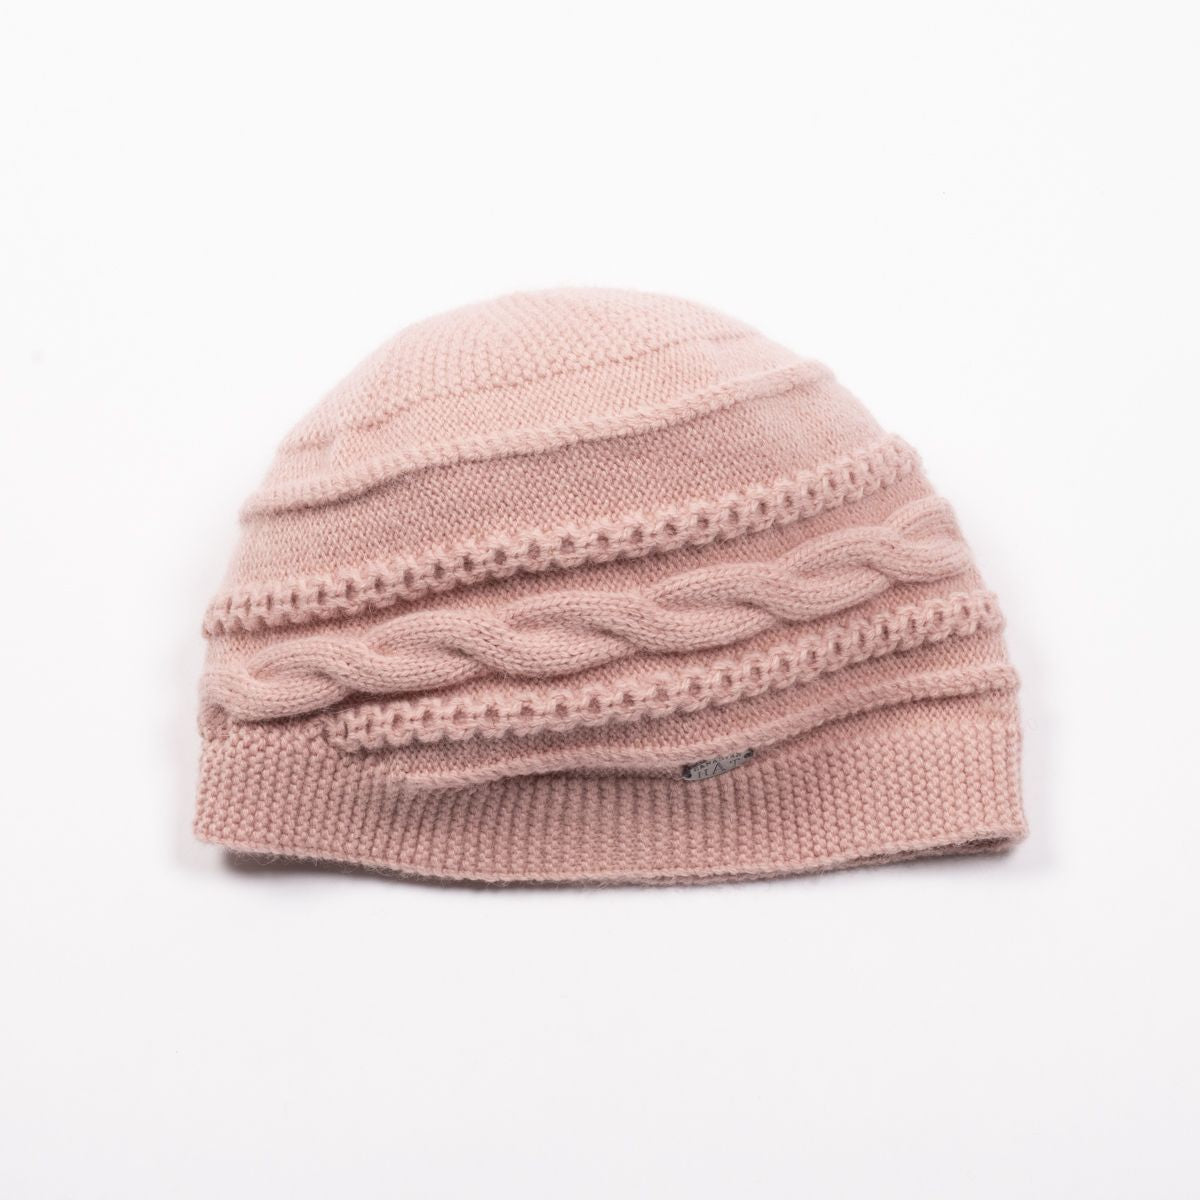 CANADIAN HAT  7800 PASTEL PINK ONE SIZE  